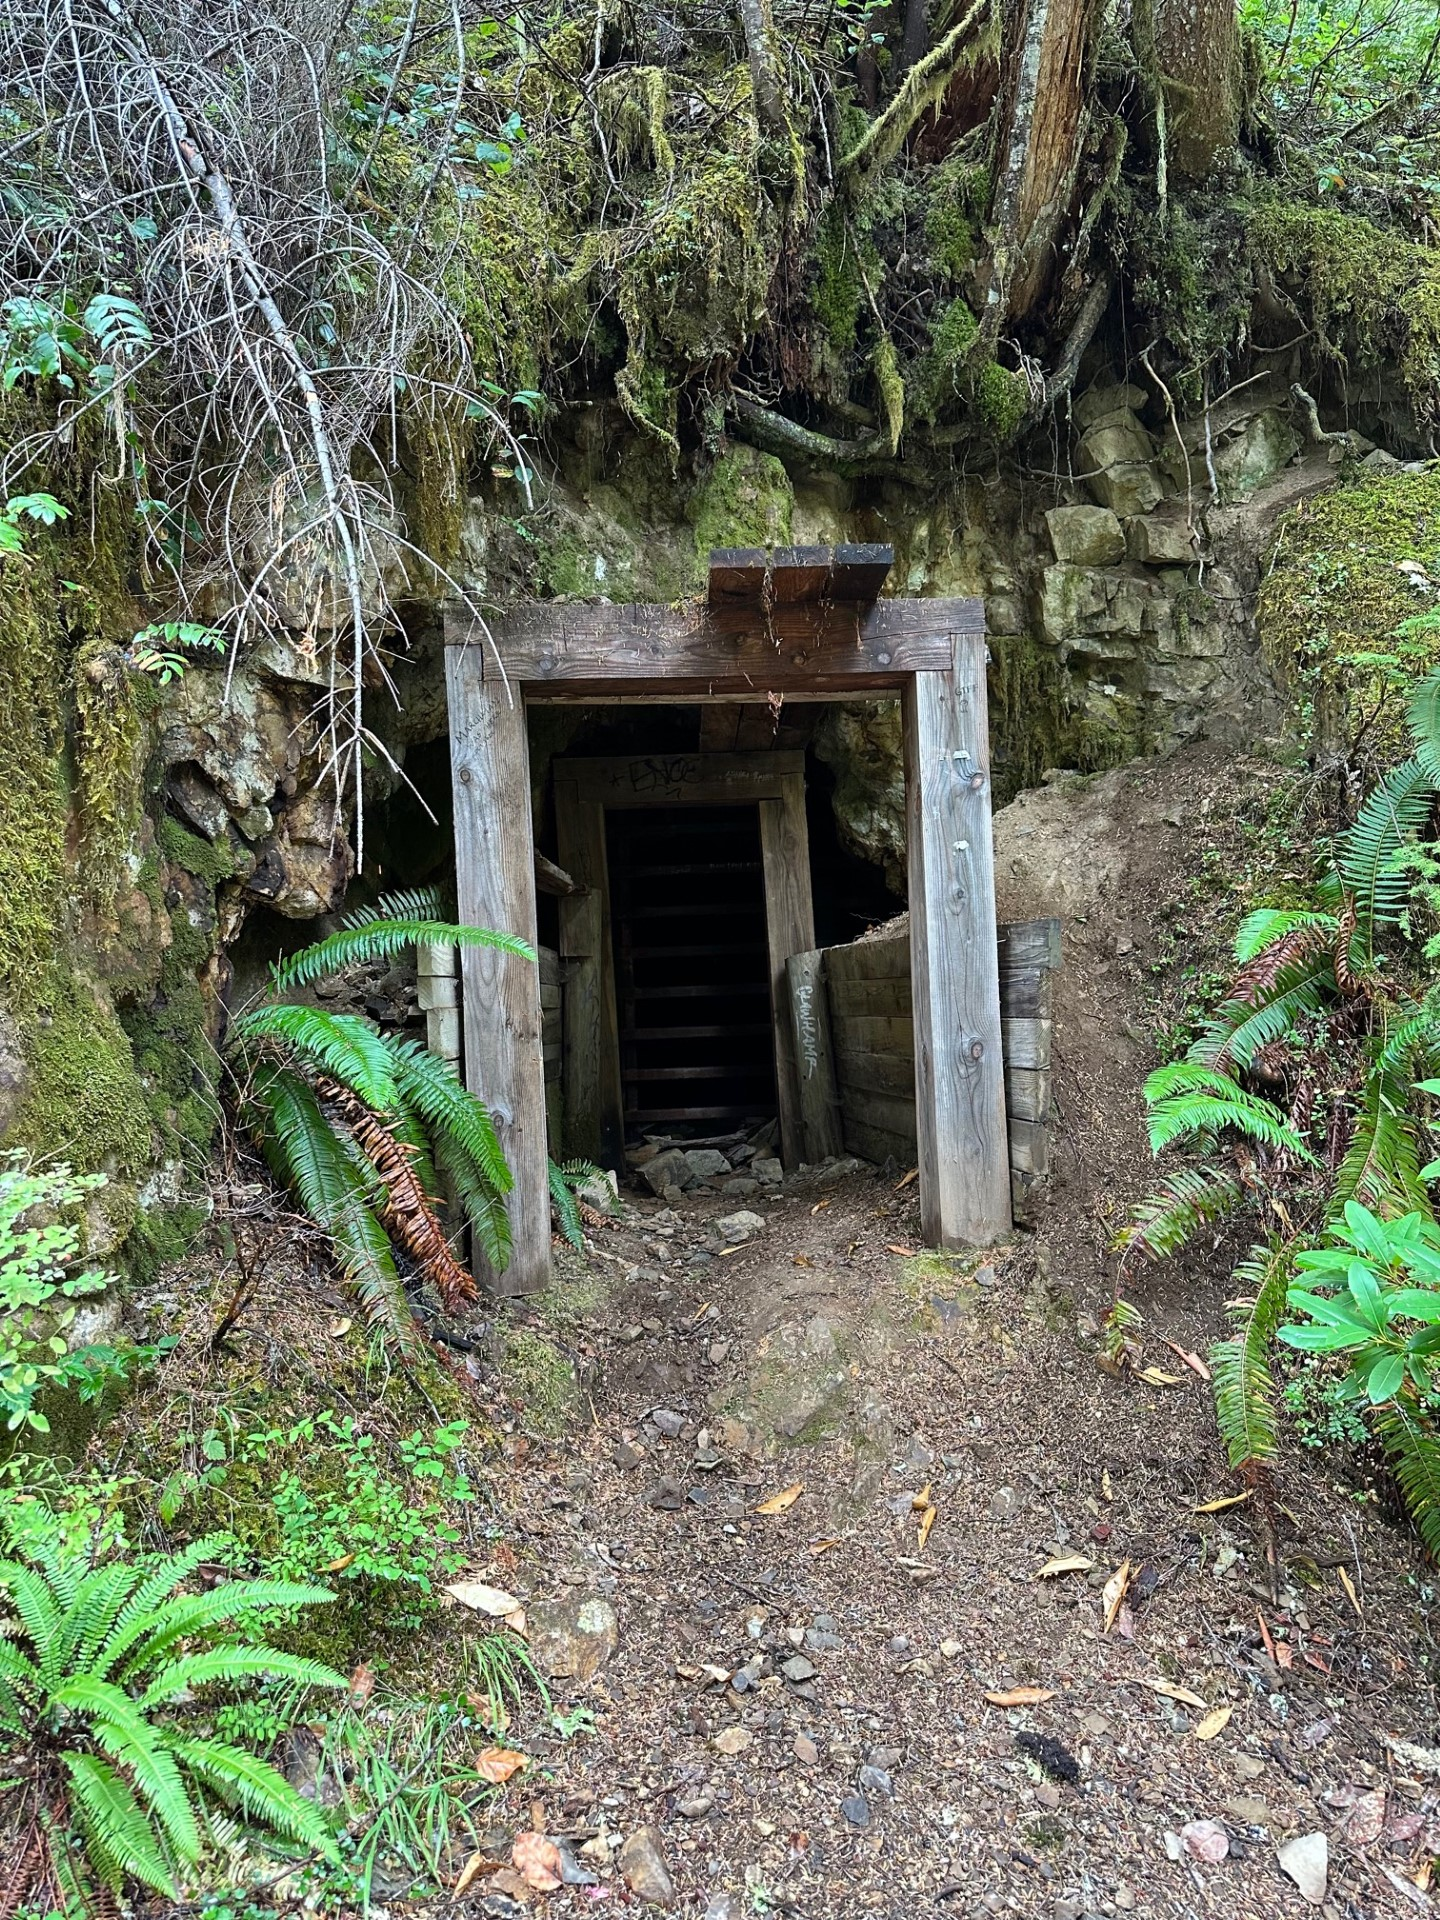 The opening to a mine shaft surrounded by flammable vegetation